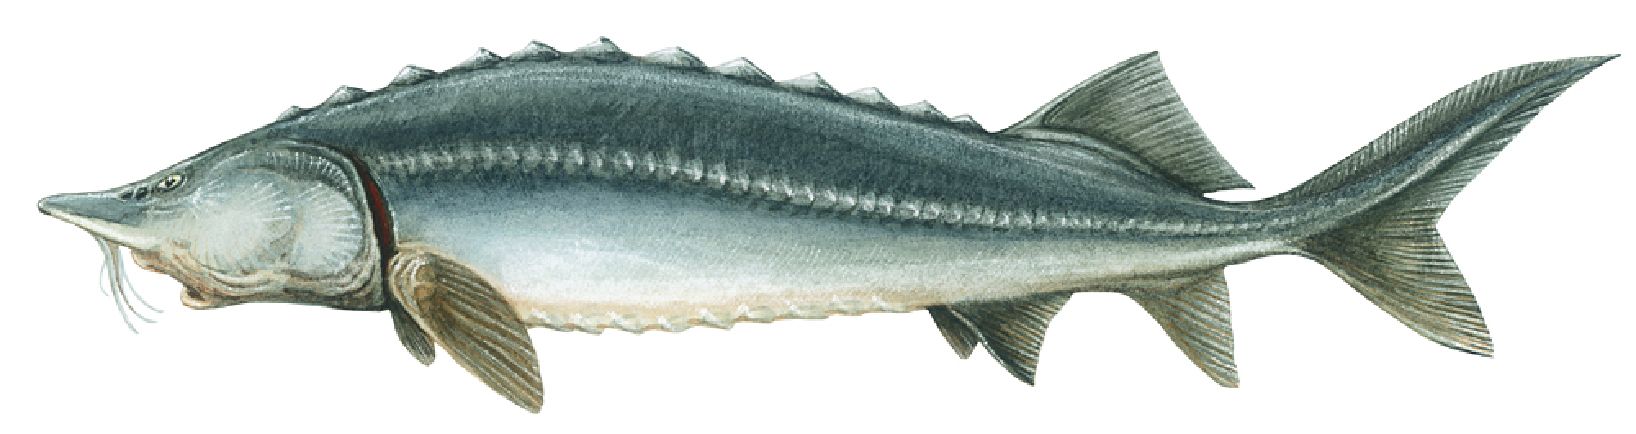 Picture of a sturgeon